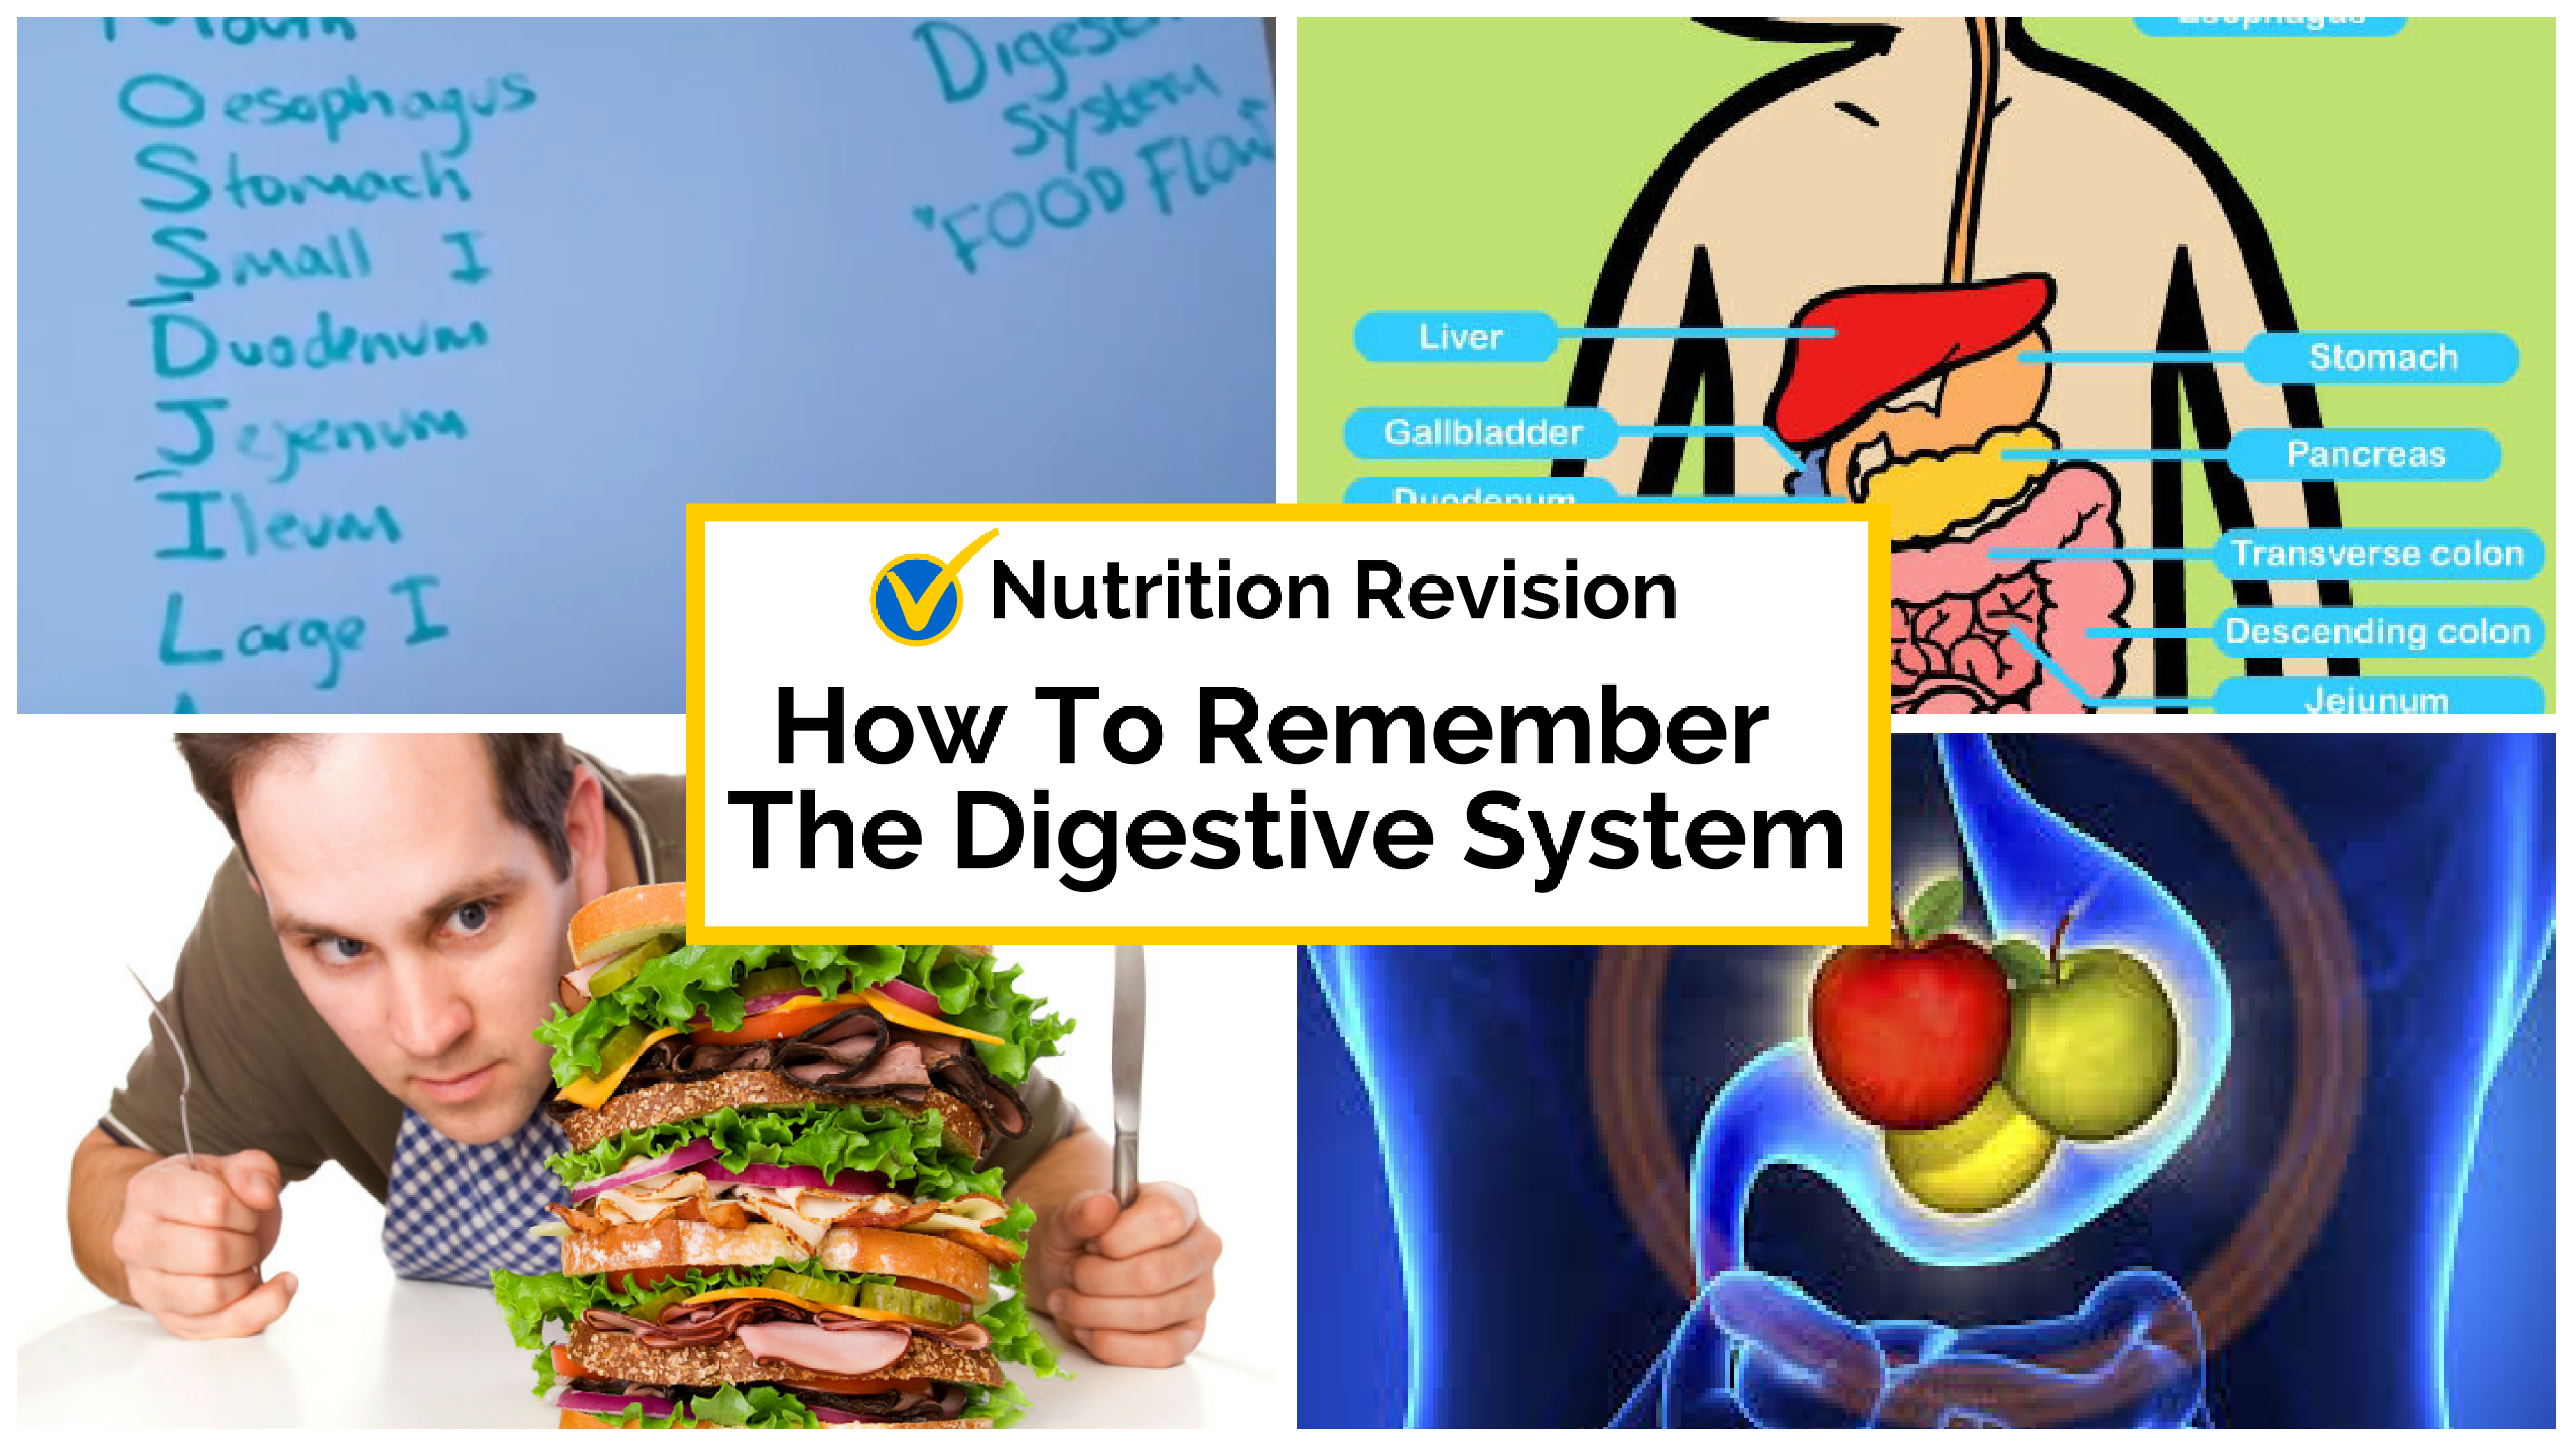 How To Remember the Digestive System